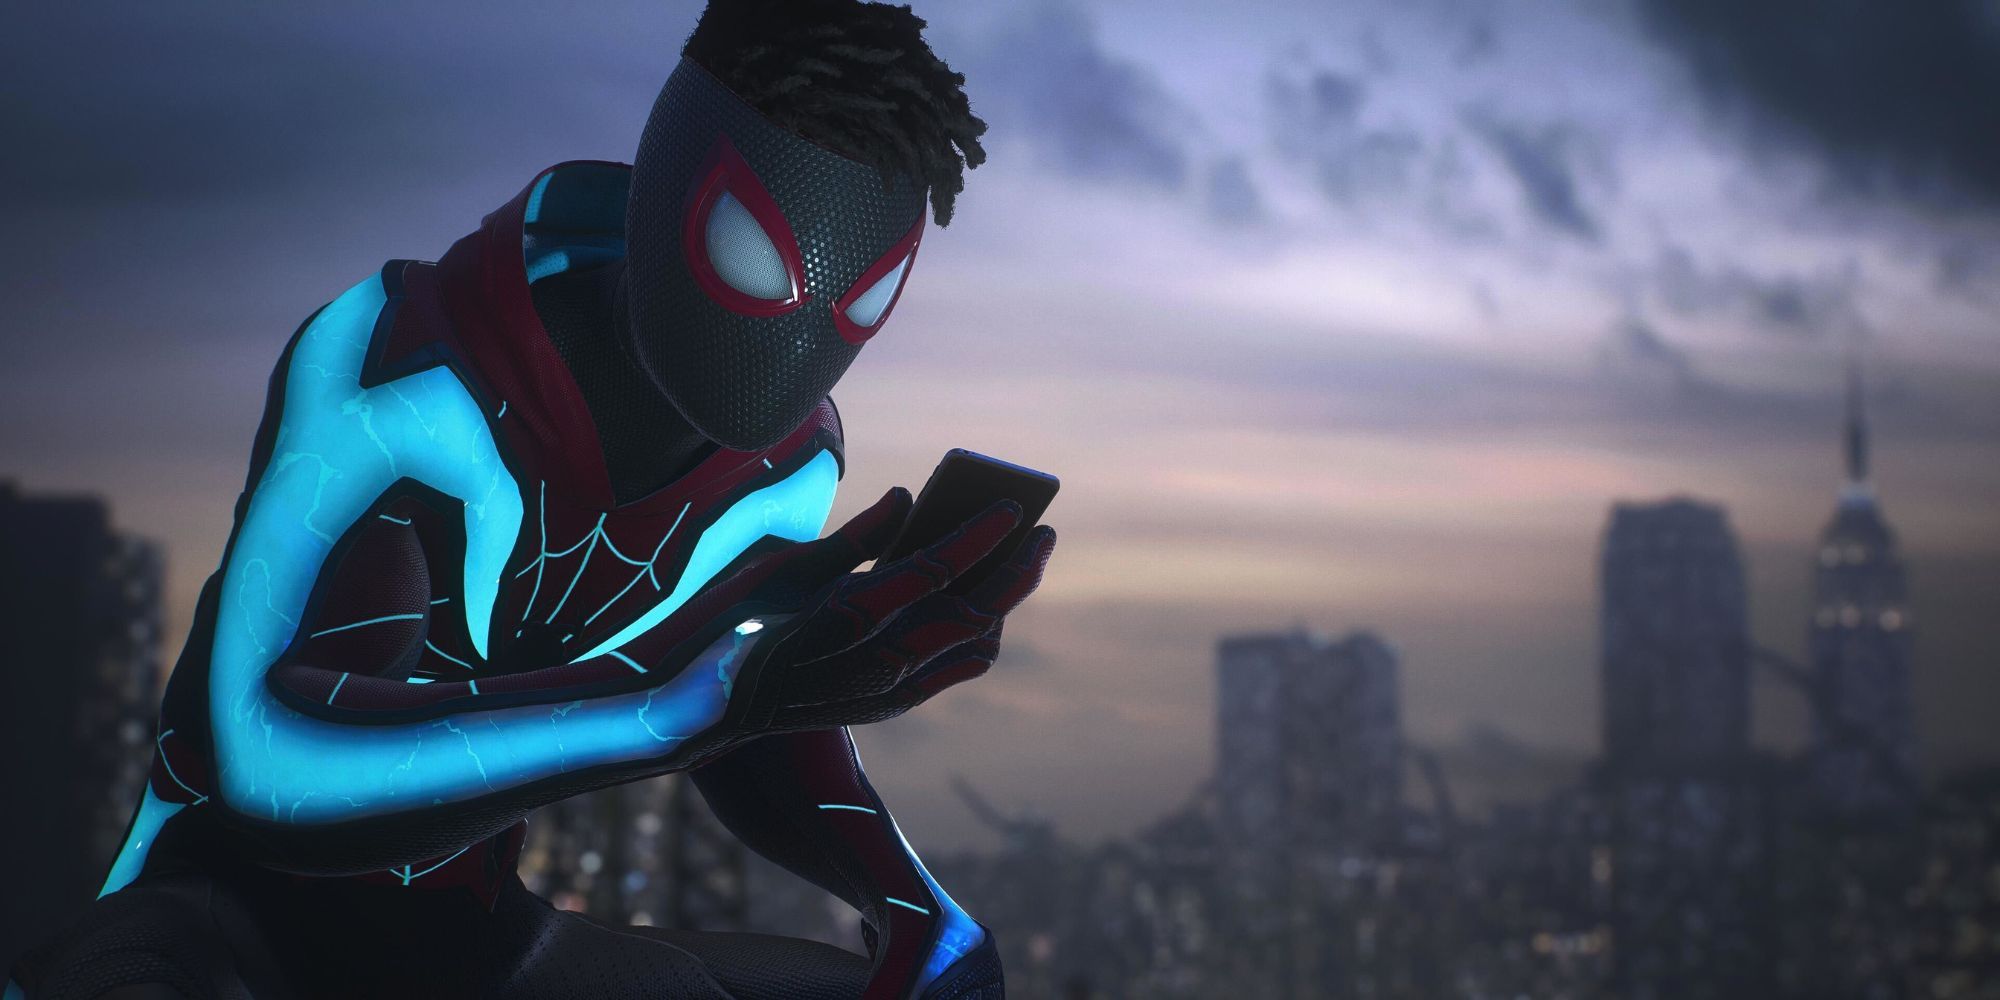 Miles looking at his phone in his infamous endgame Spider-Man 2 suit.